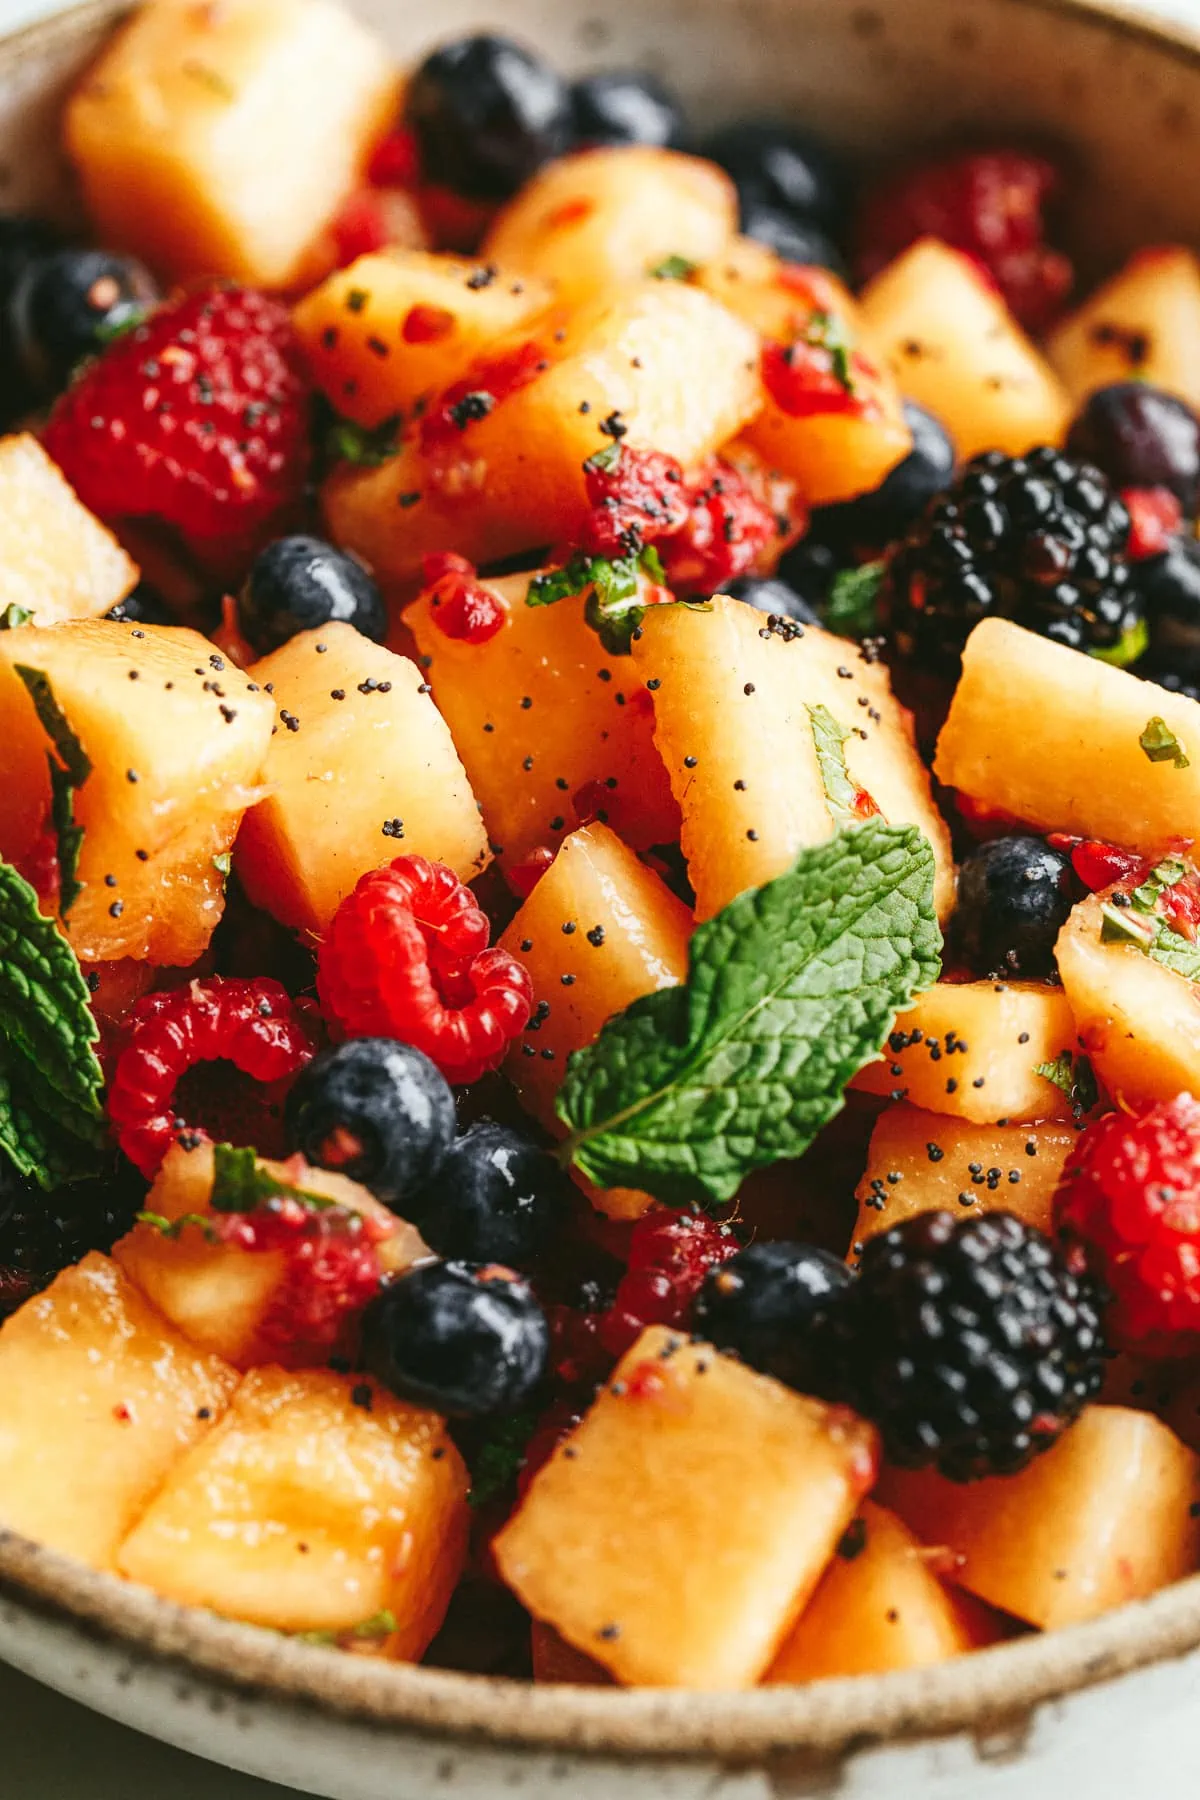 Closeup of a prepared bowl of low carb fruit salad with fresh mint as garnish.